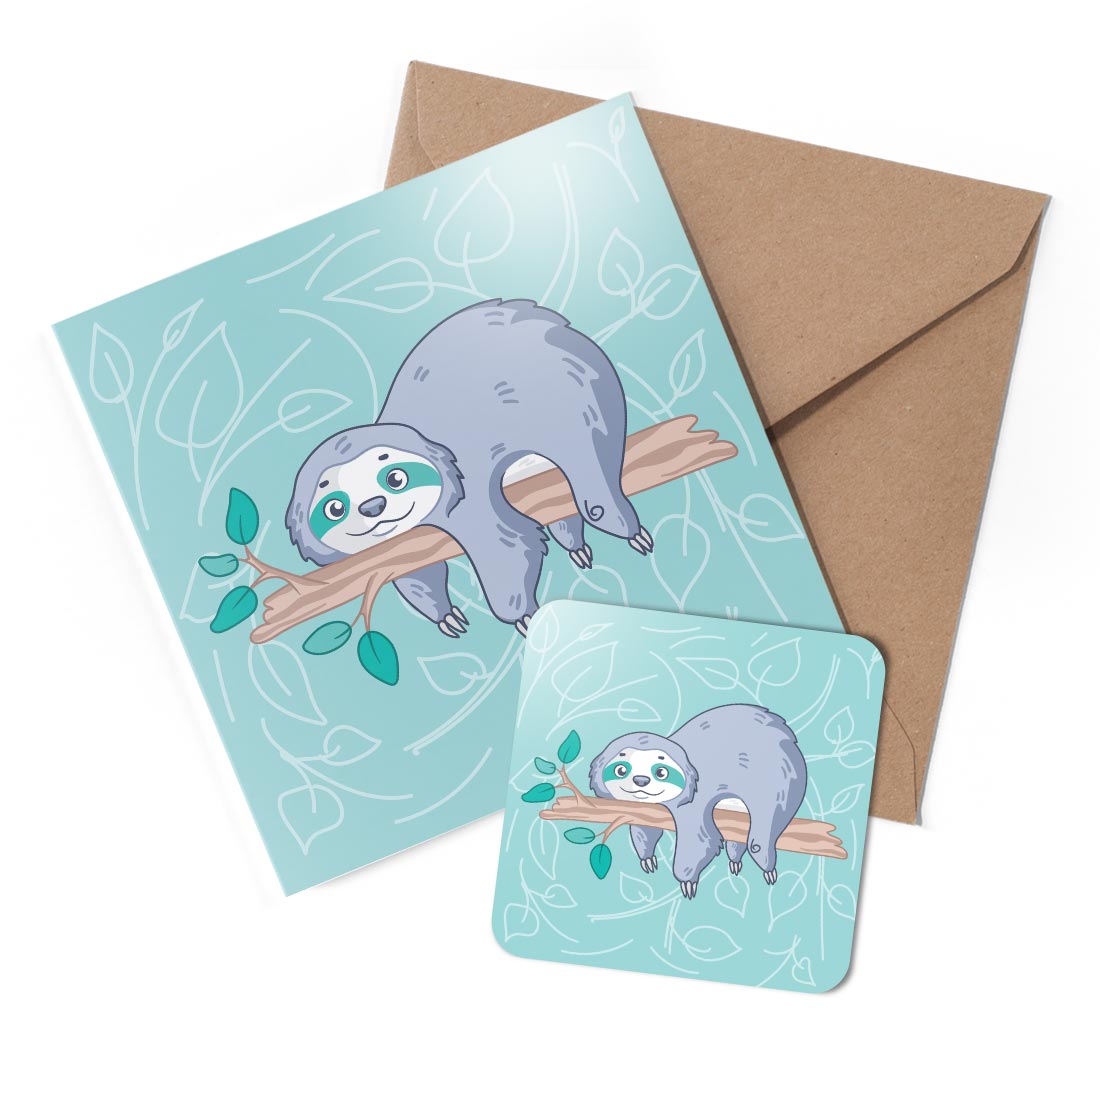 1 x Greeting Card & Coaster Set - Lazy Sloth Tree Branch Turquoise #60275